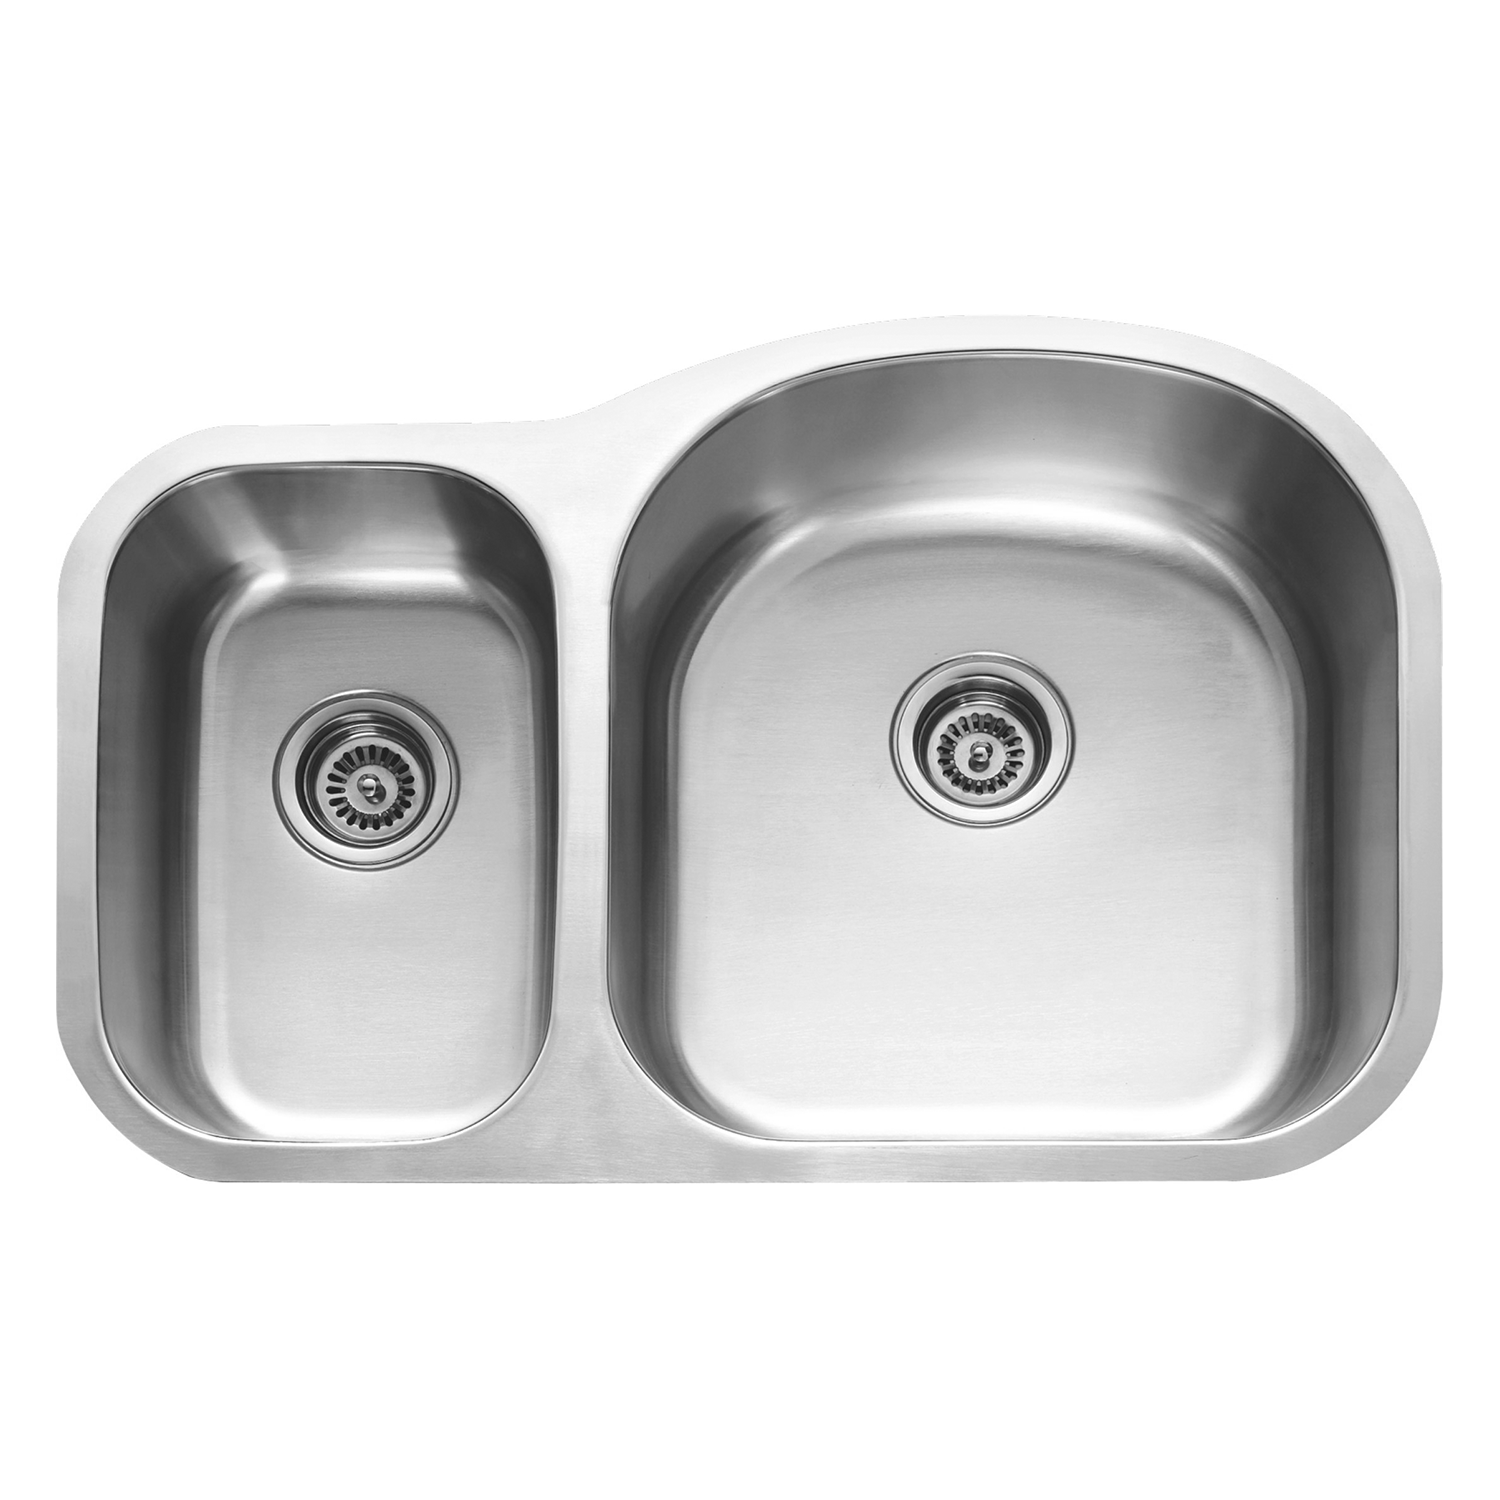 DAX 30/70 Double Bowl Undermount Kitchen Sink, 18 Gauge Stainless Steel, Brushed Finish , 31-1/2 x 20-1/2 x 9 Inches (DAX-3121R)